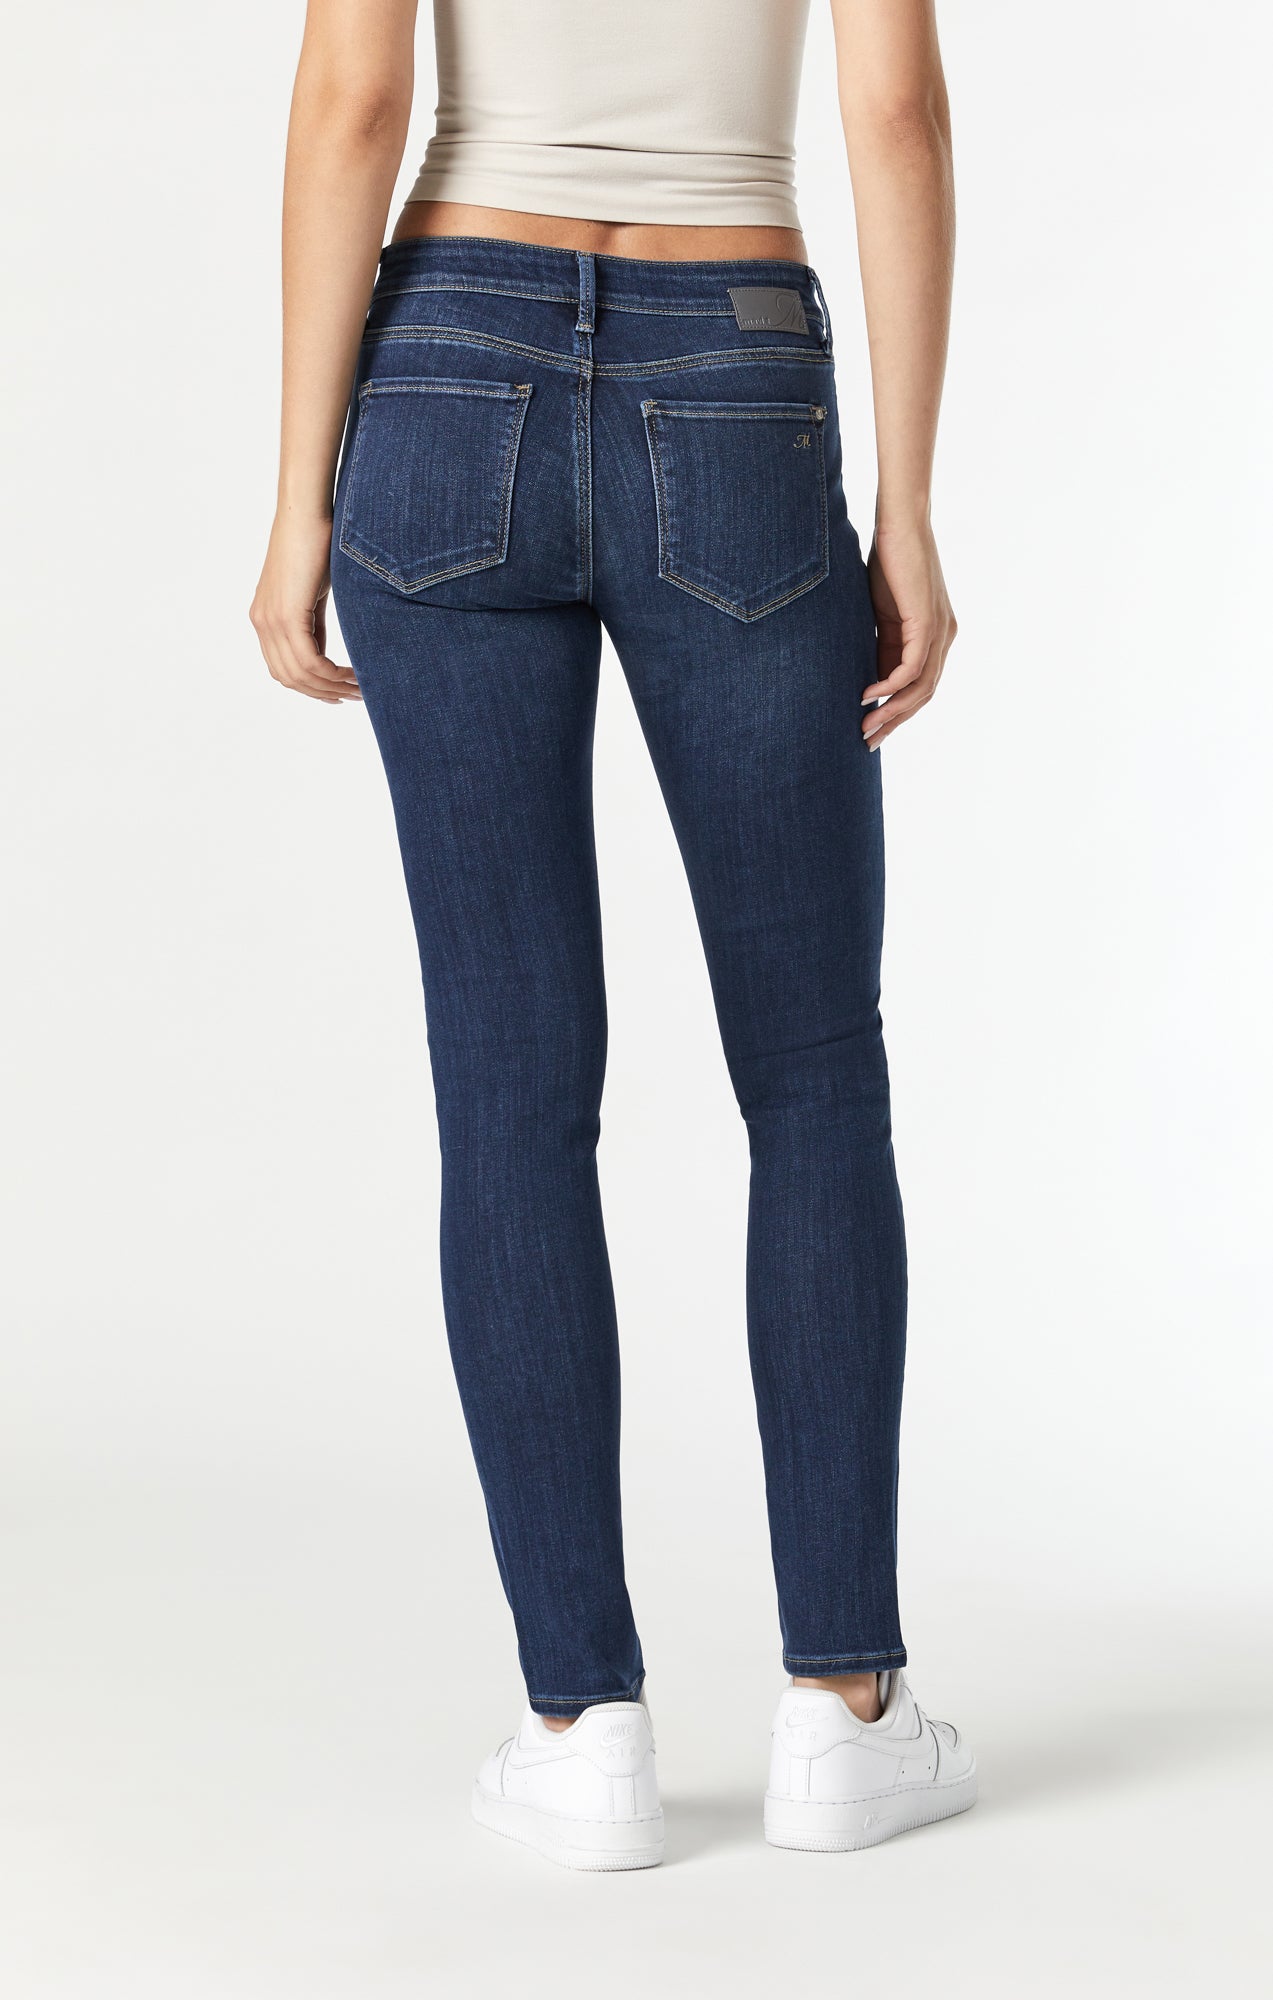 Sonoma Mid rise Straight Women's 10 jeans